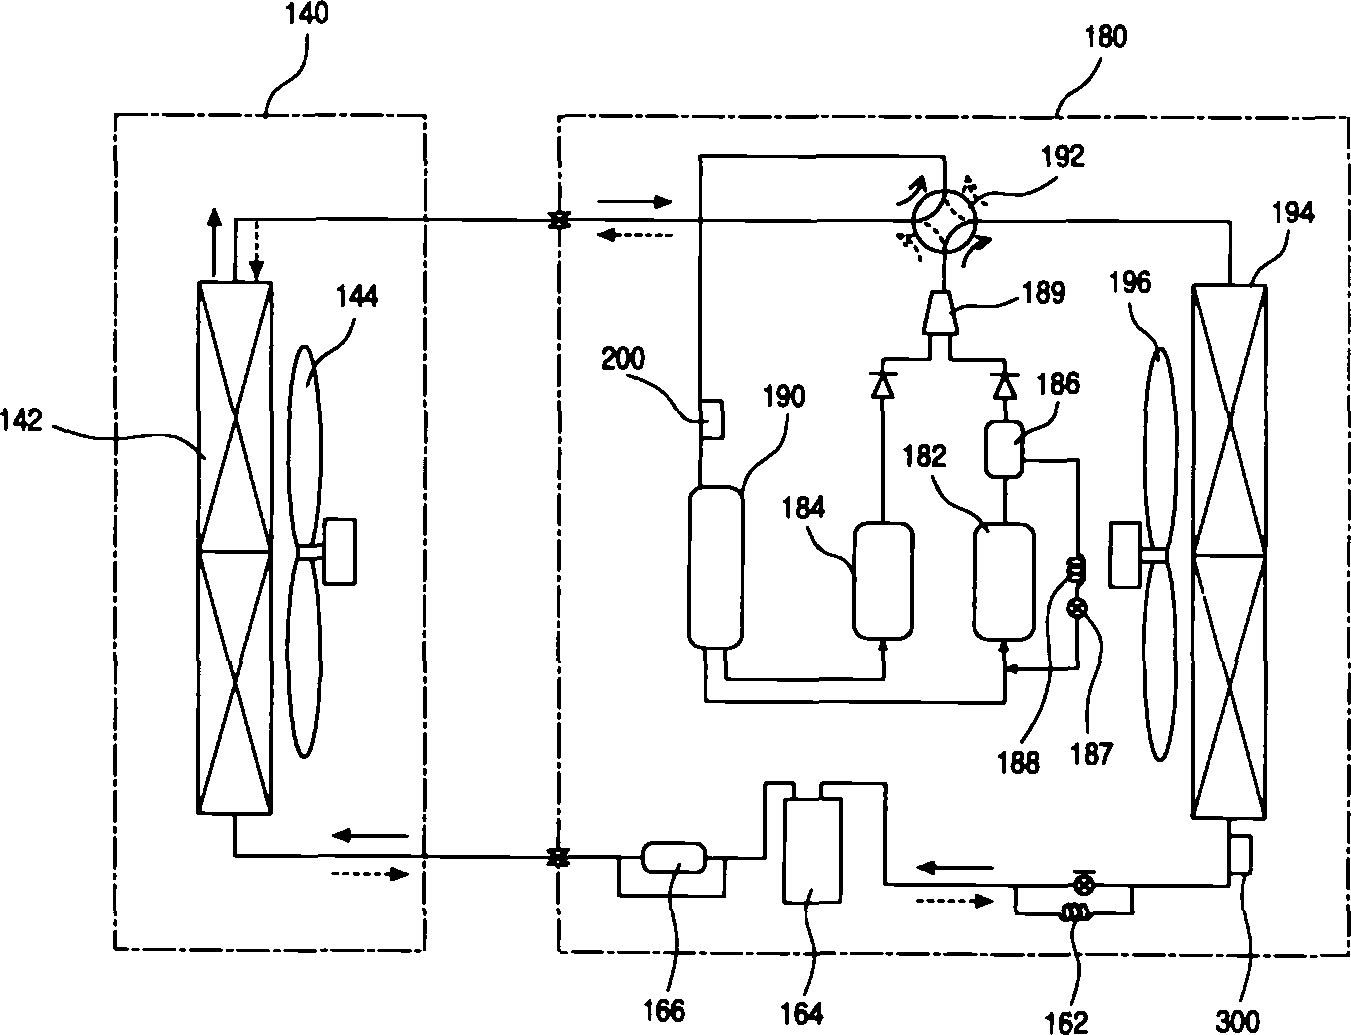 Outdoor fan controlling method for air conditioner under overloading state